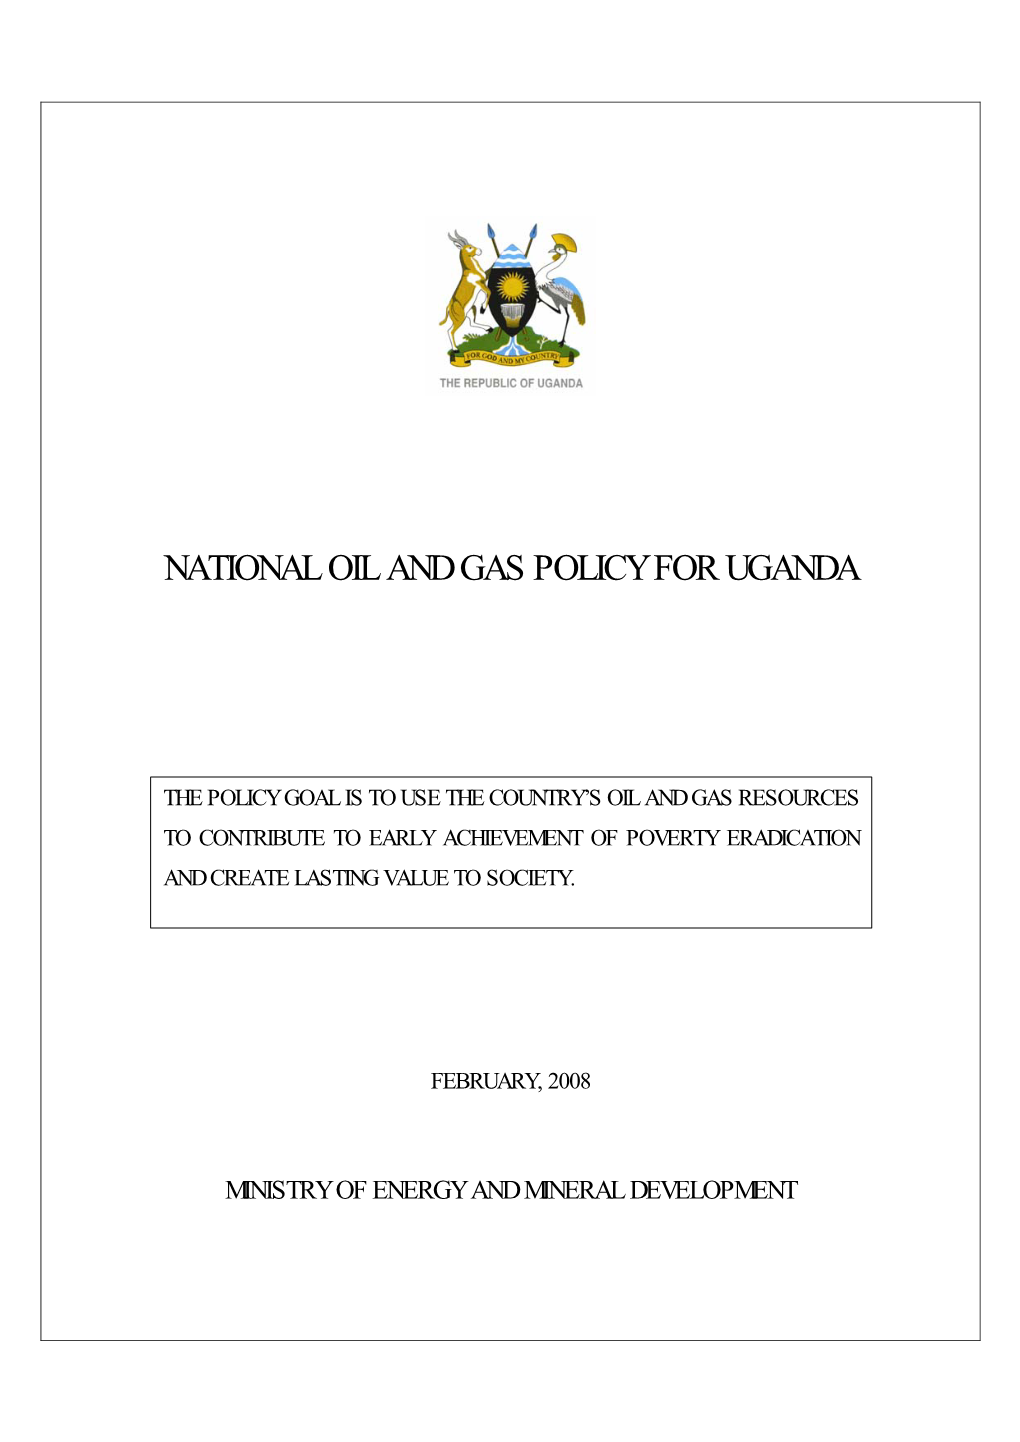 National Oil and Gas Policy for Uganda